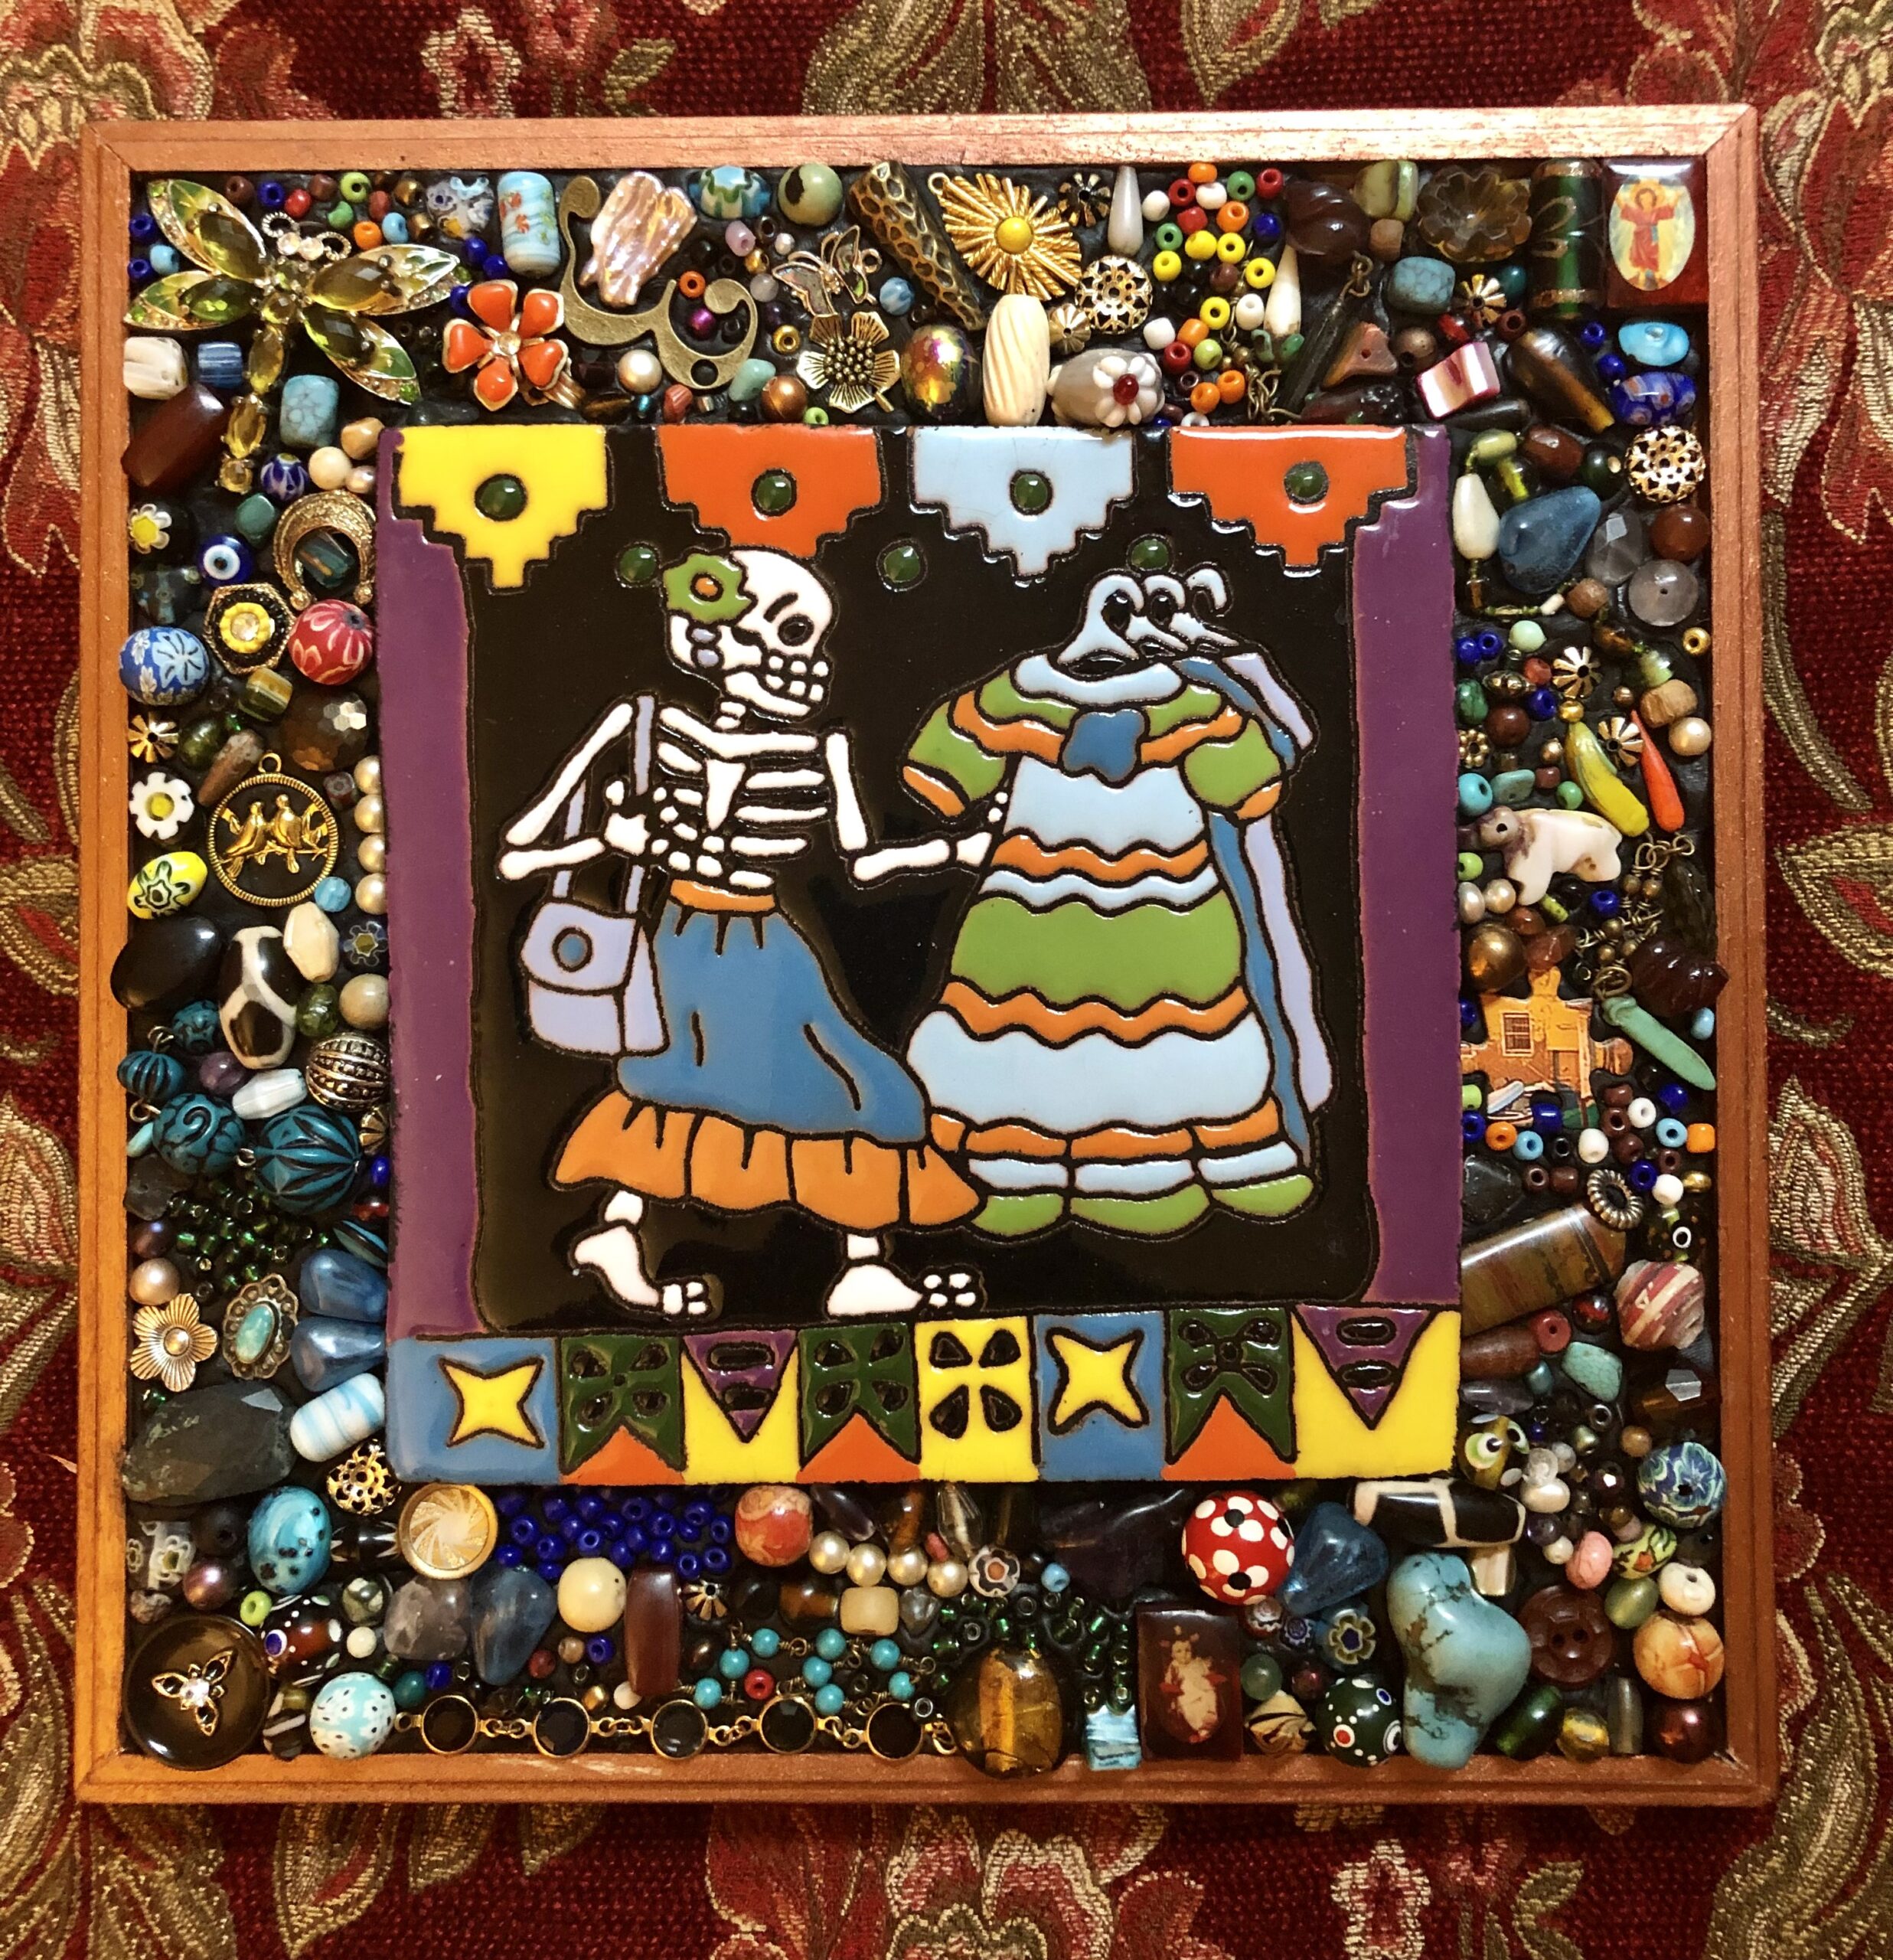 The centerpiece of this artwork by Laurie Algar is a mosaic of a skeleton in a skirt looking at a rack of dresses, surrounded by a frame filled with small pieces of colorful jewelry and beads.